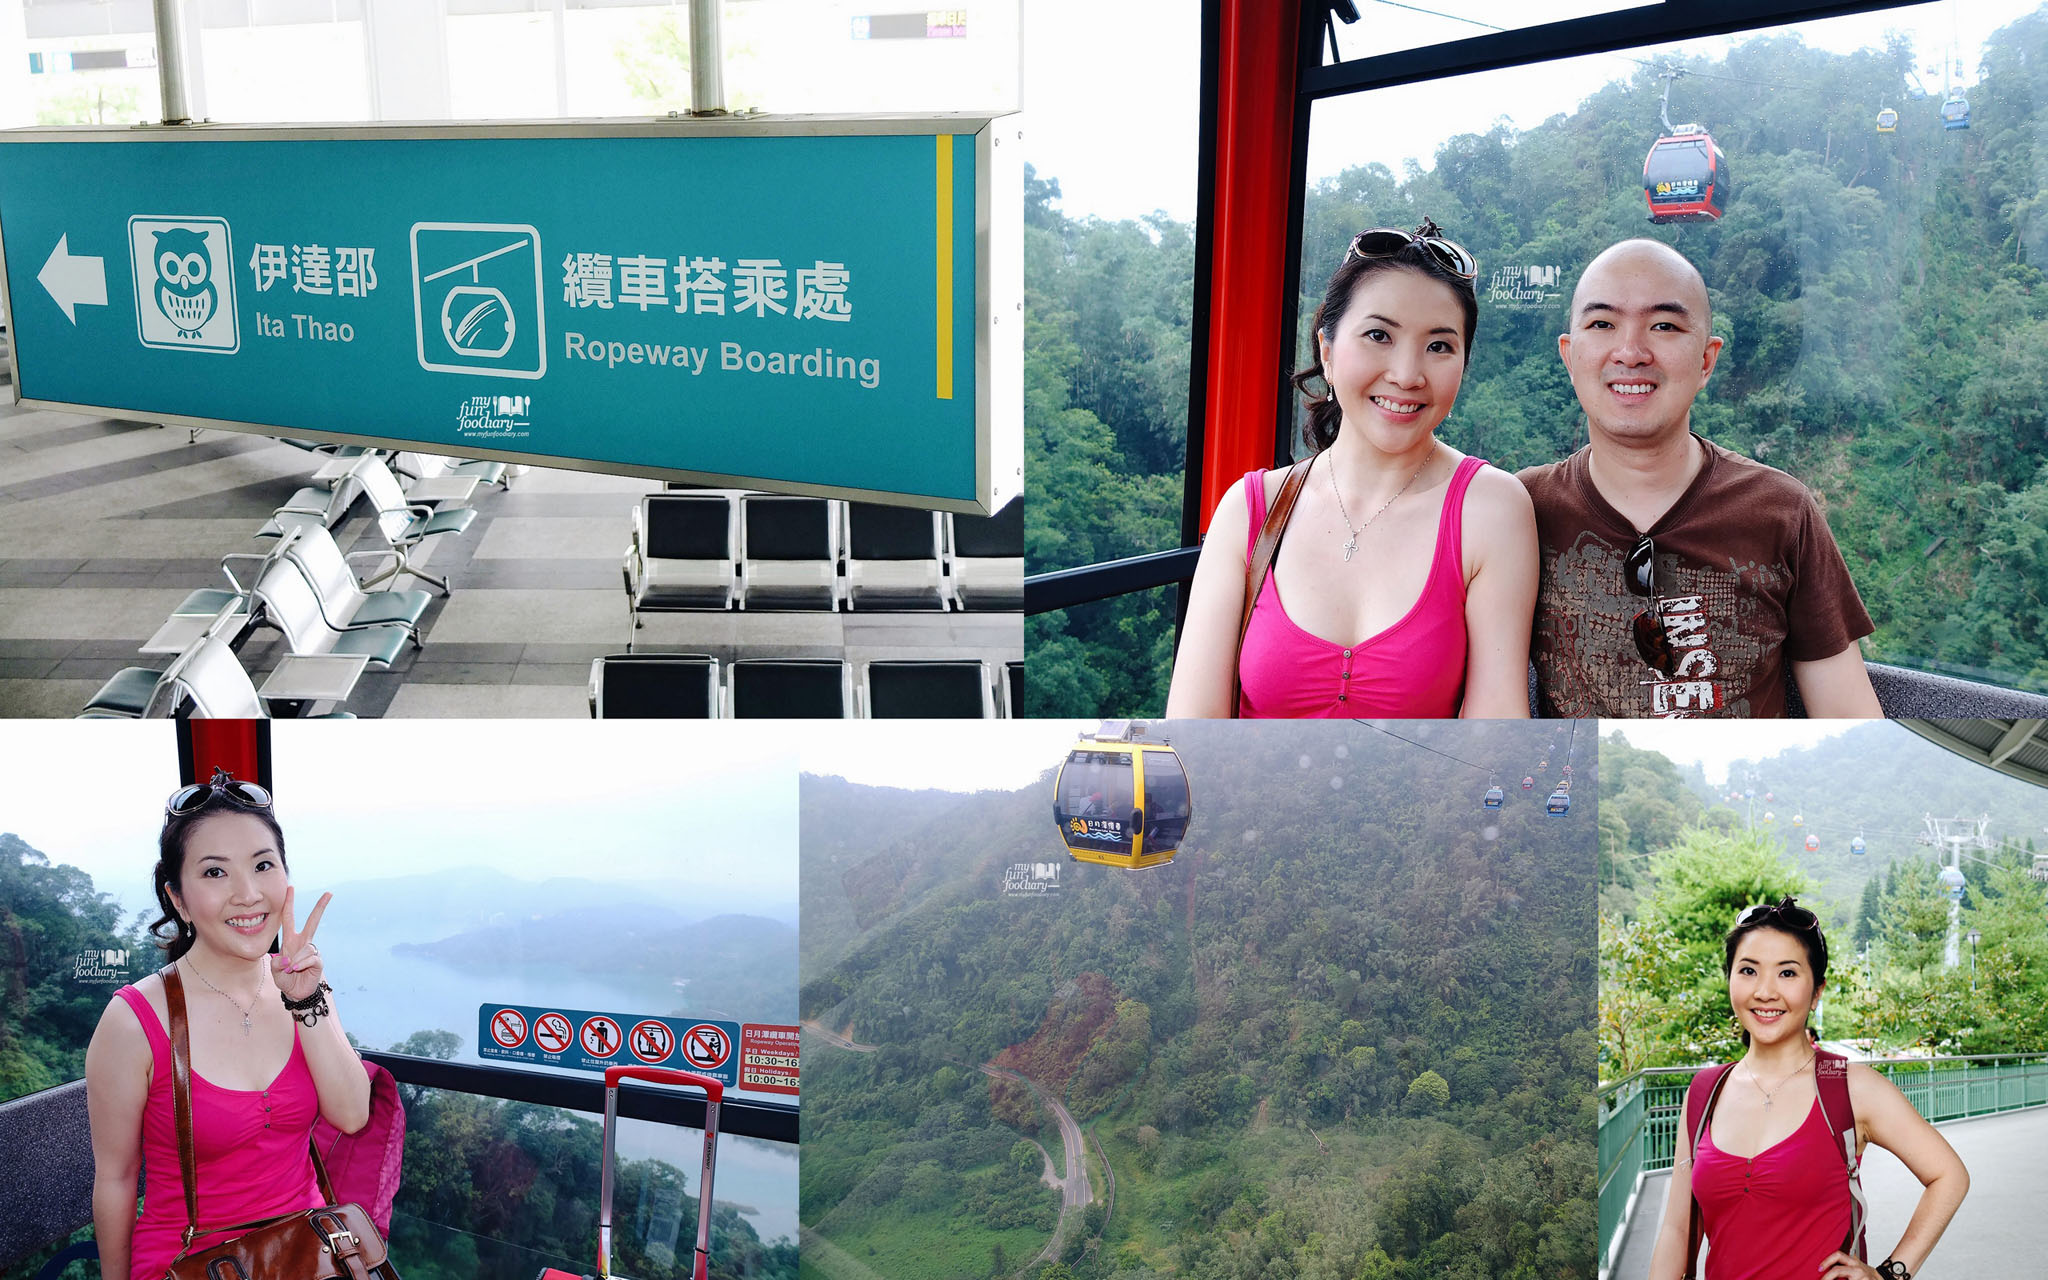 from-cable-car-station-heading-to-formosan-aboriginal-village-taiwan-by-myfunfoodiary